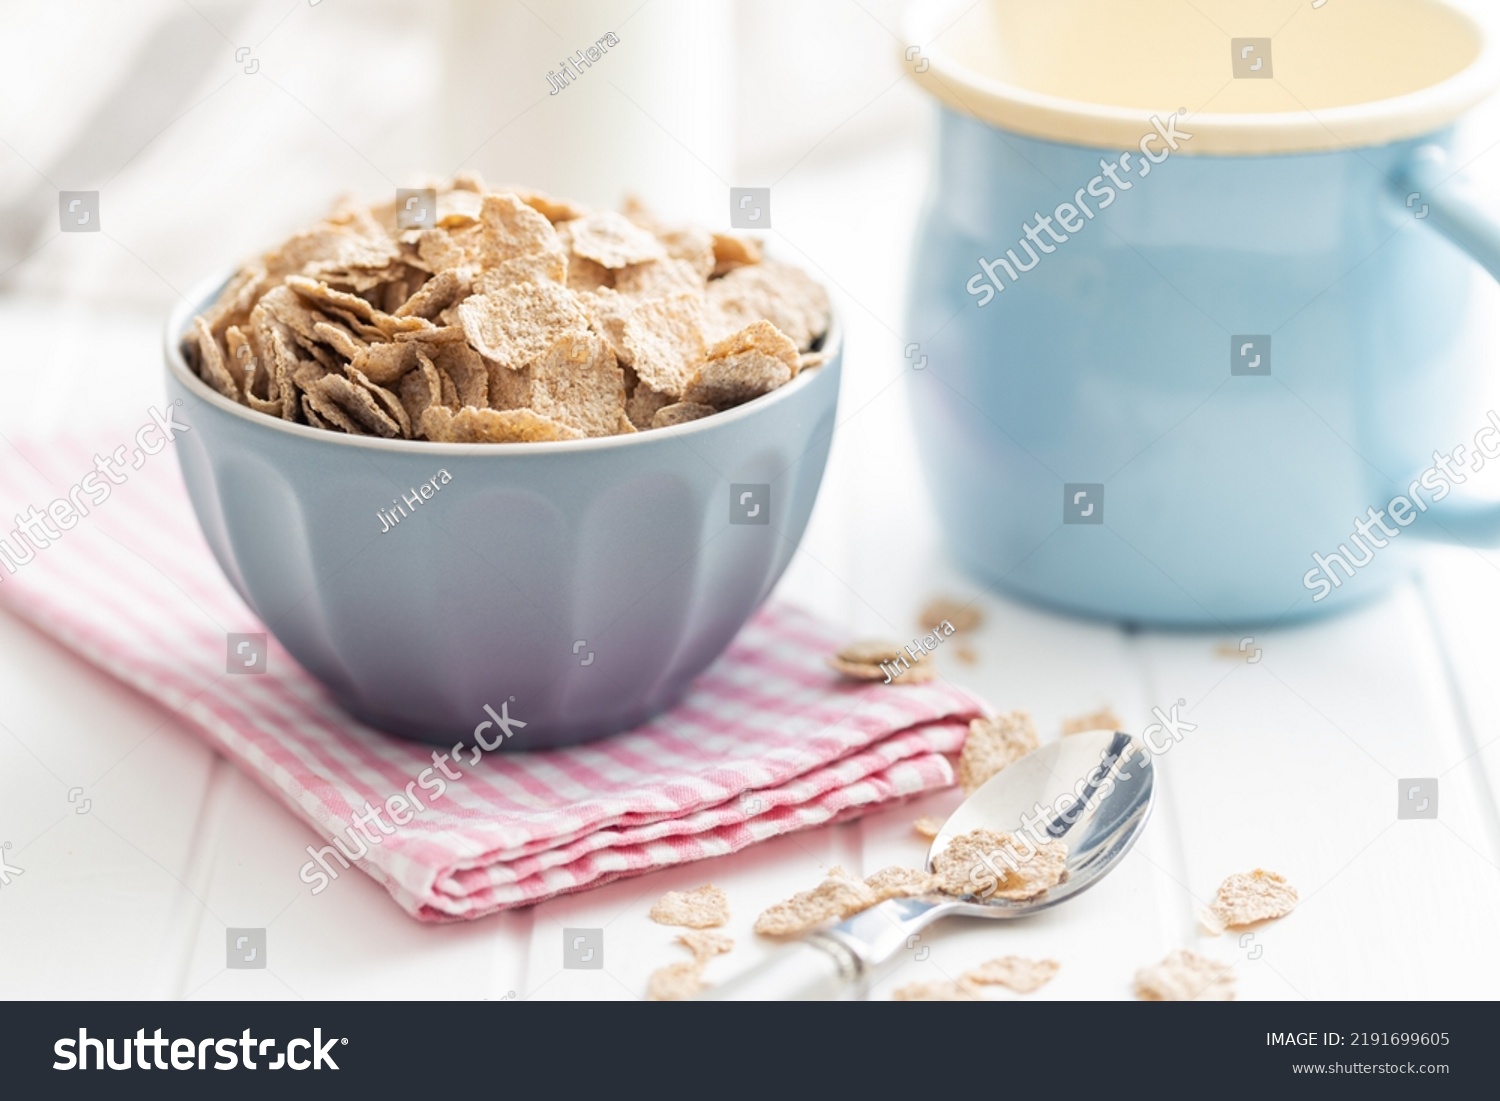 Whole grain cereal flakes. Wholegrain breakfast cereals in bowl on a kitchen table. #2191699605